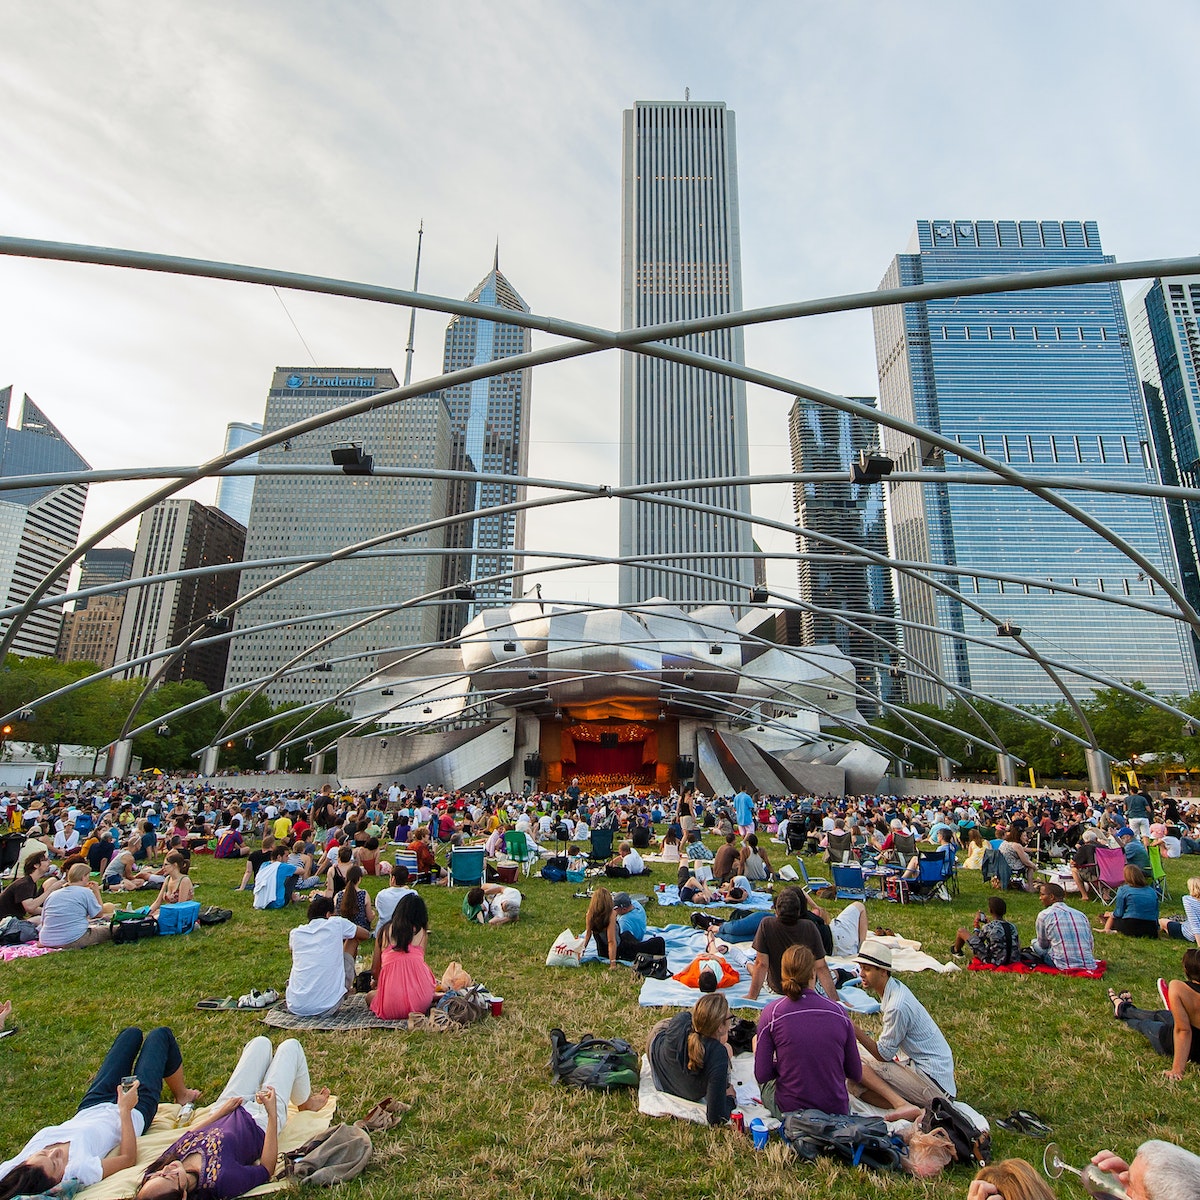 July 7, 2012: Crowd gathered at the Jay Pritzker Pavilion in Millennium Park.